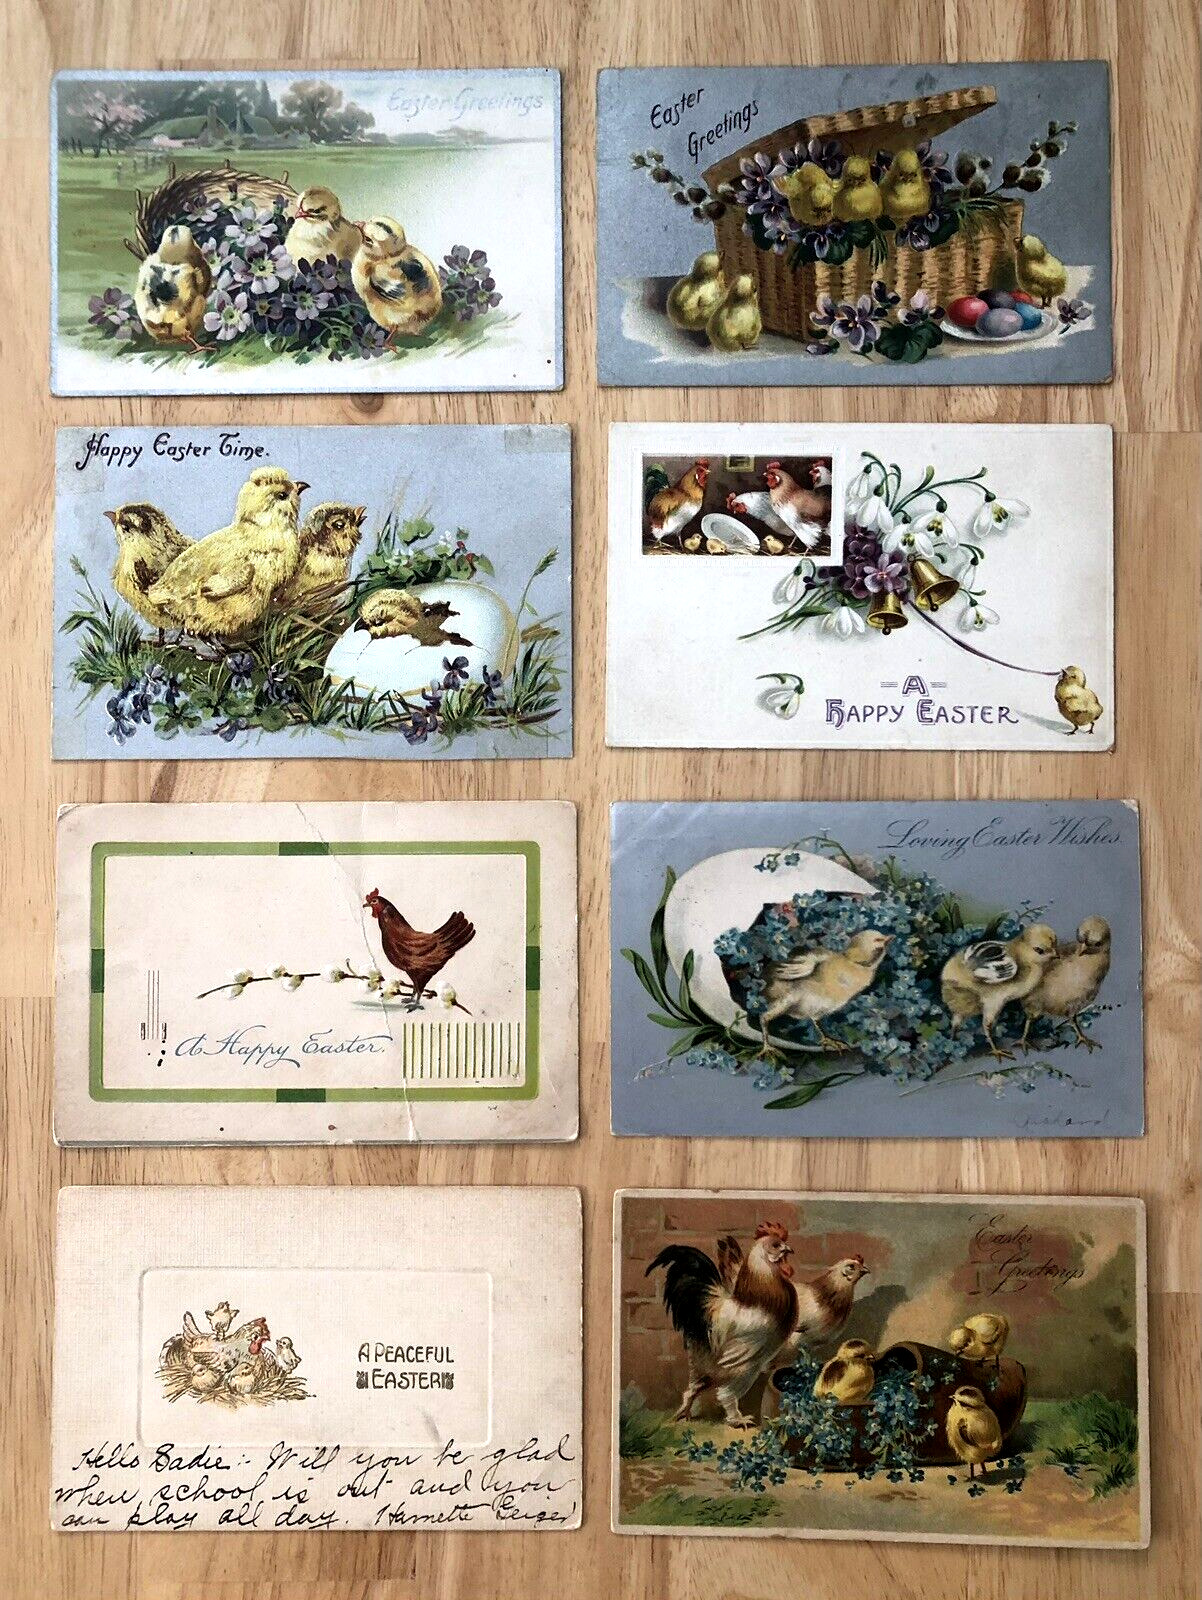 ANTIQUE EARLY 1900s LOT OF 8 EASTER CHICK POSTCARDS - 4 1 CENT FRANKLIN STAMPS